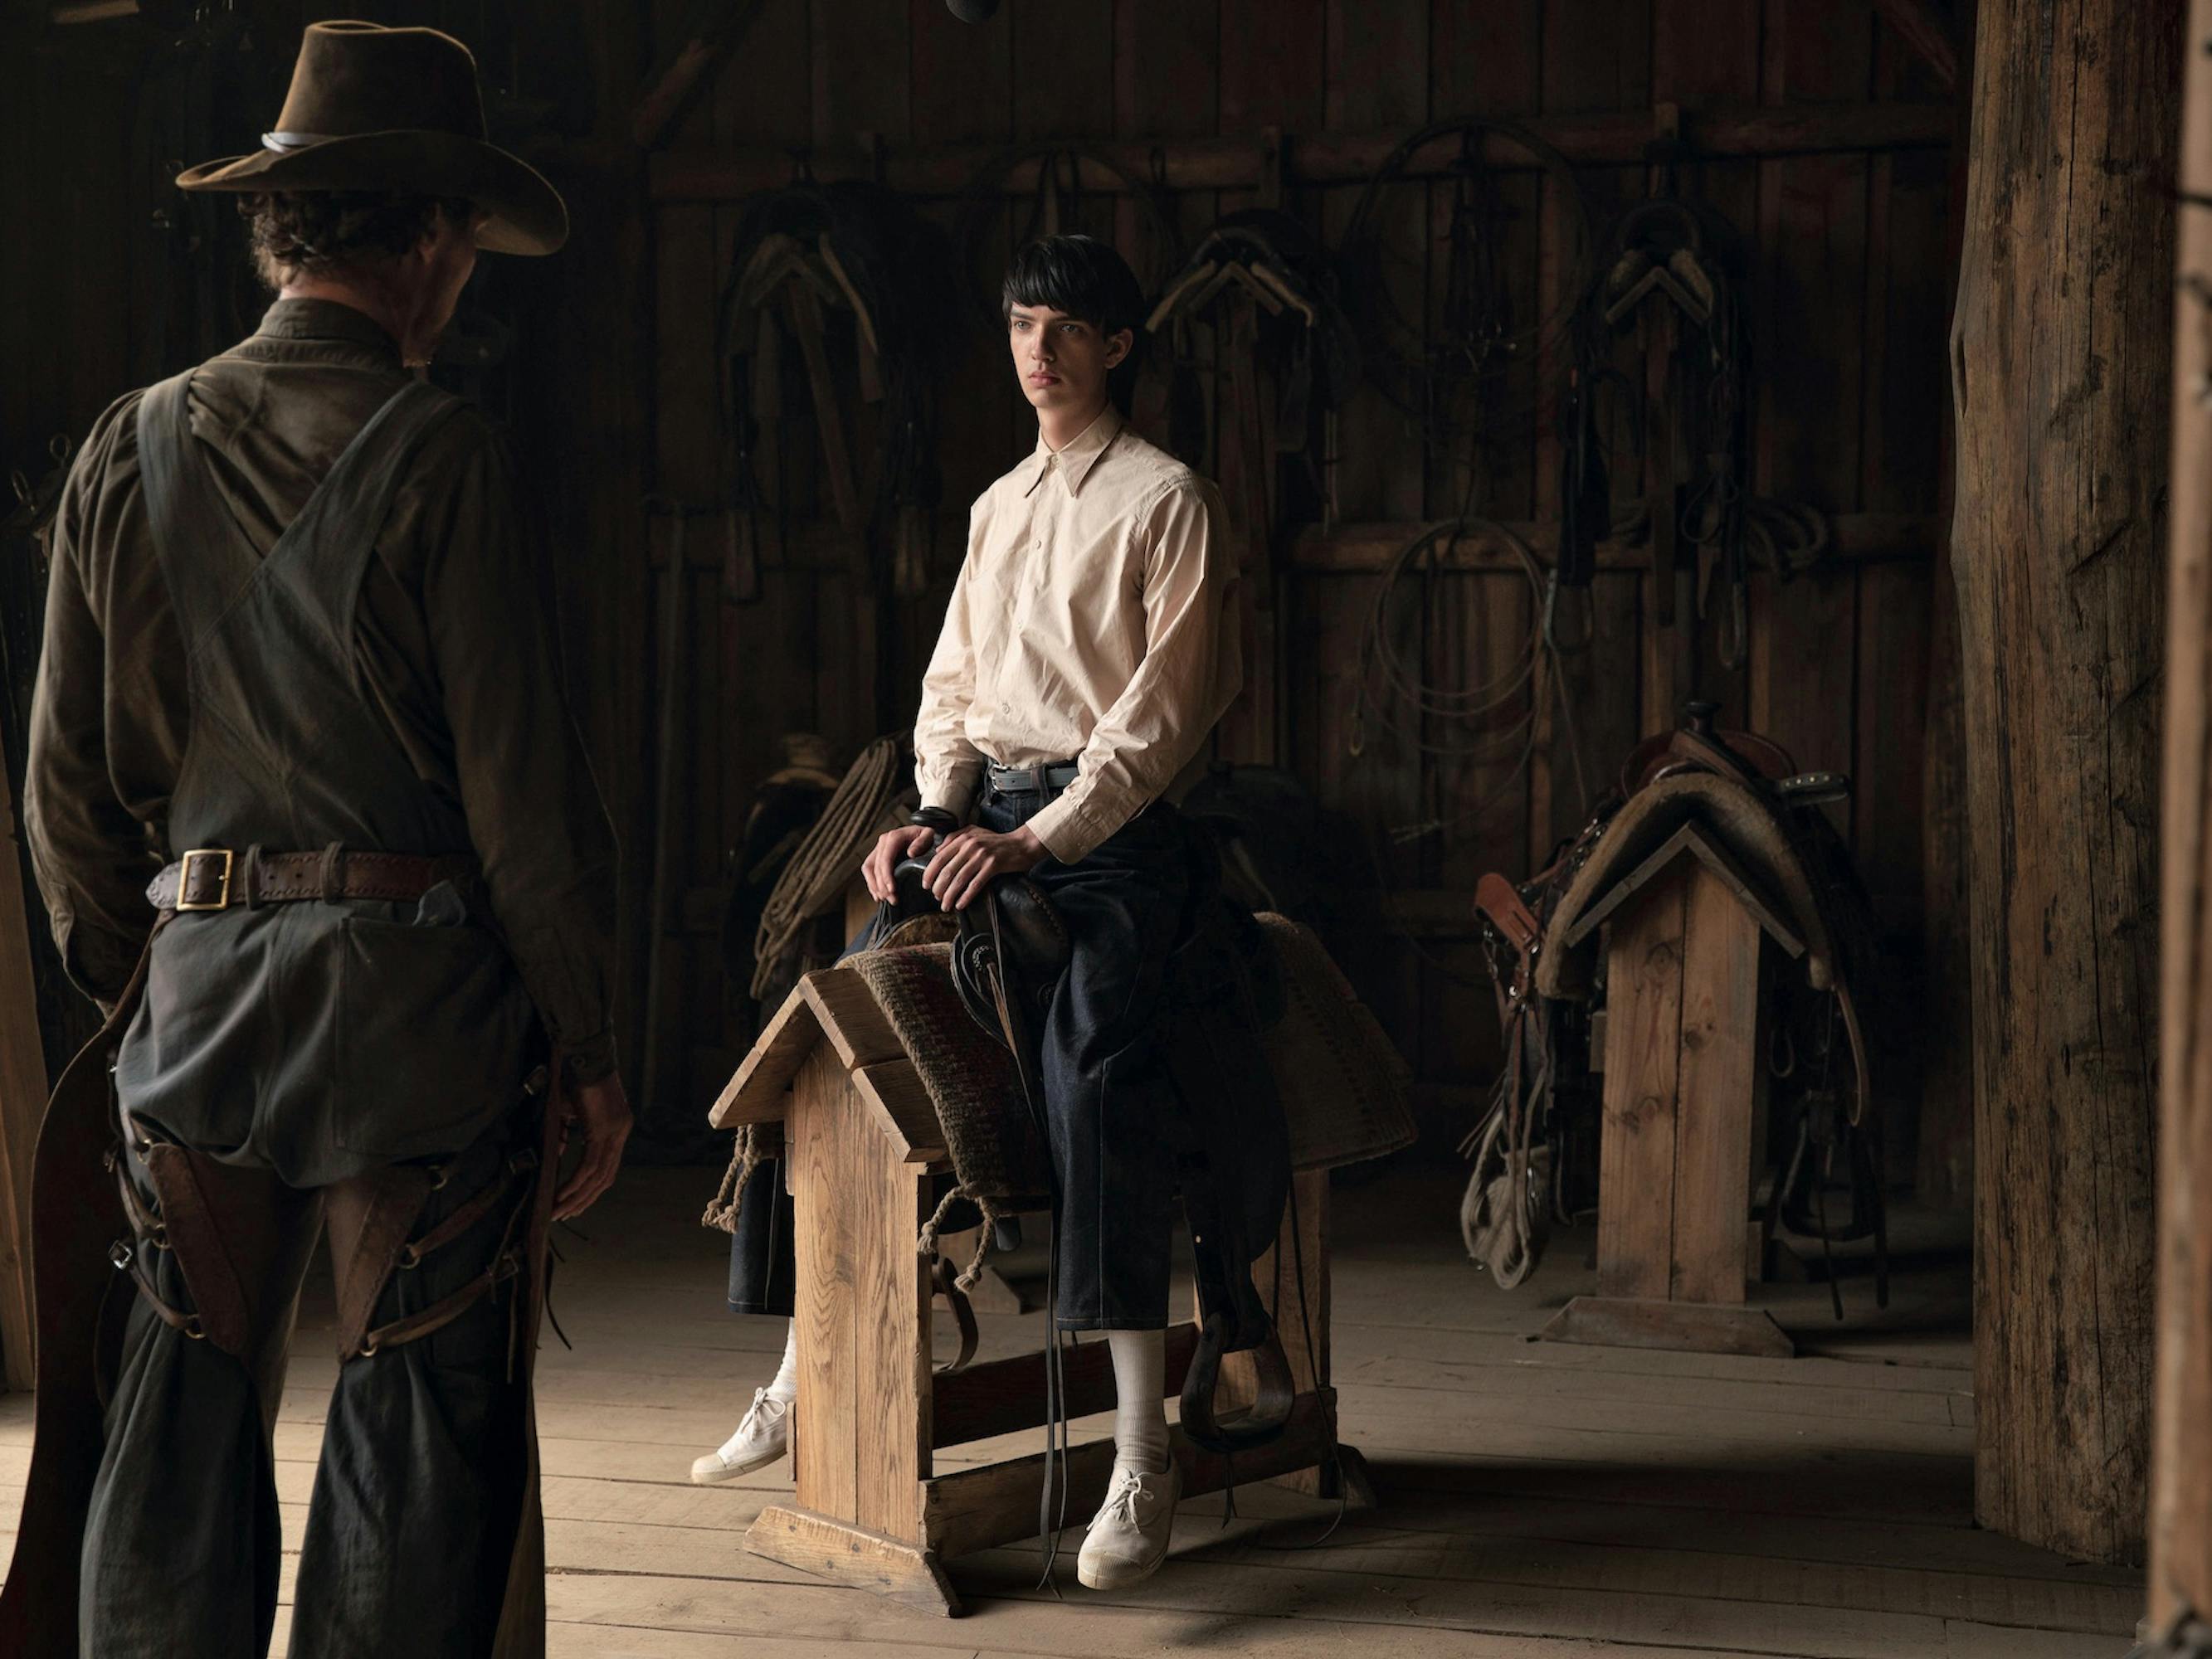 Phil Burbank (Benedict Cumberbatch) and Peter Gordon (Kodi Smit-McPhee) in an open barn. Benedict has his back to the camera, and Kodi sits on a saddle over a wooden crate, mimicking a horse.